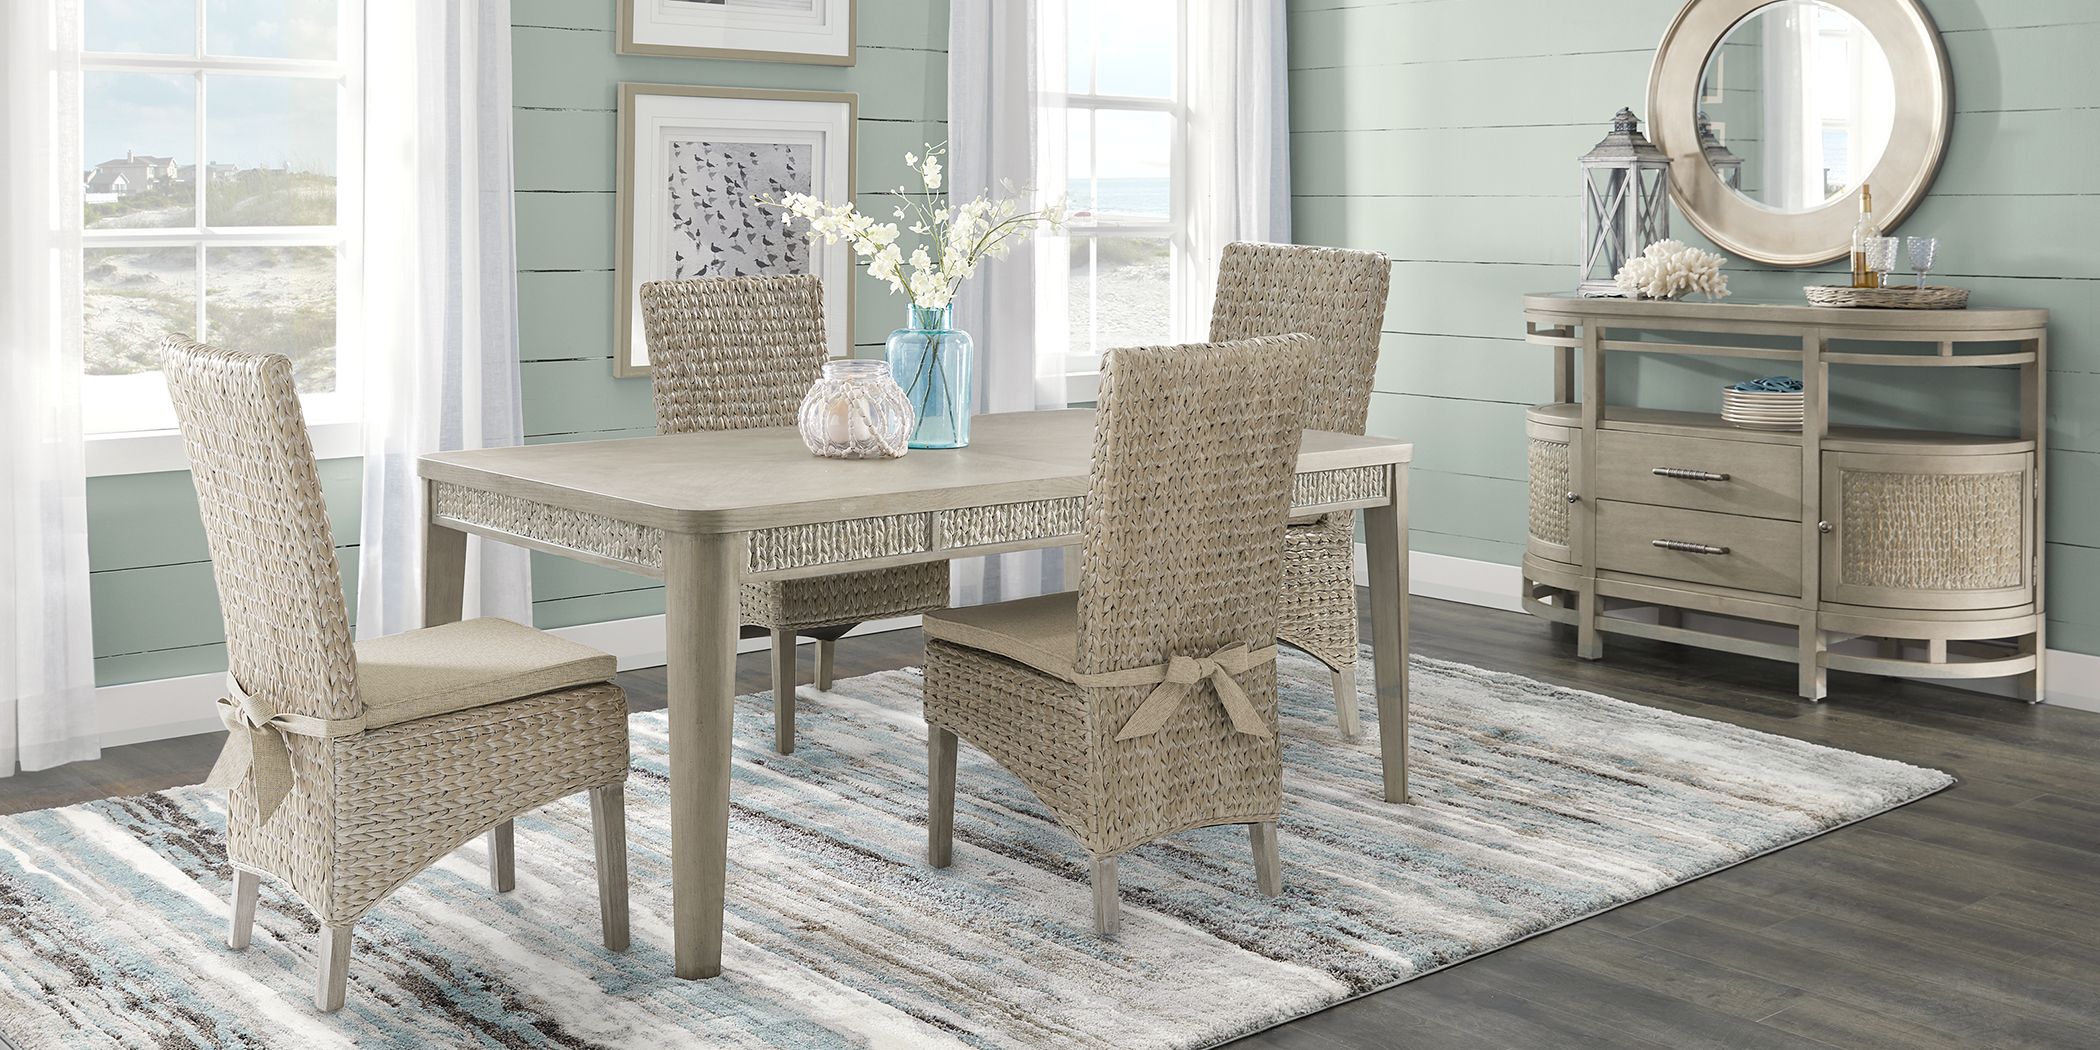 Cindy Crawford Home Golden Isles Gray 5, Rooms To Go Cindy Crawford Dining Room Sets